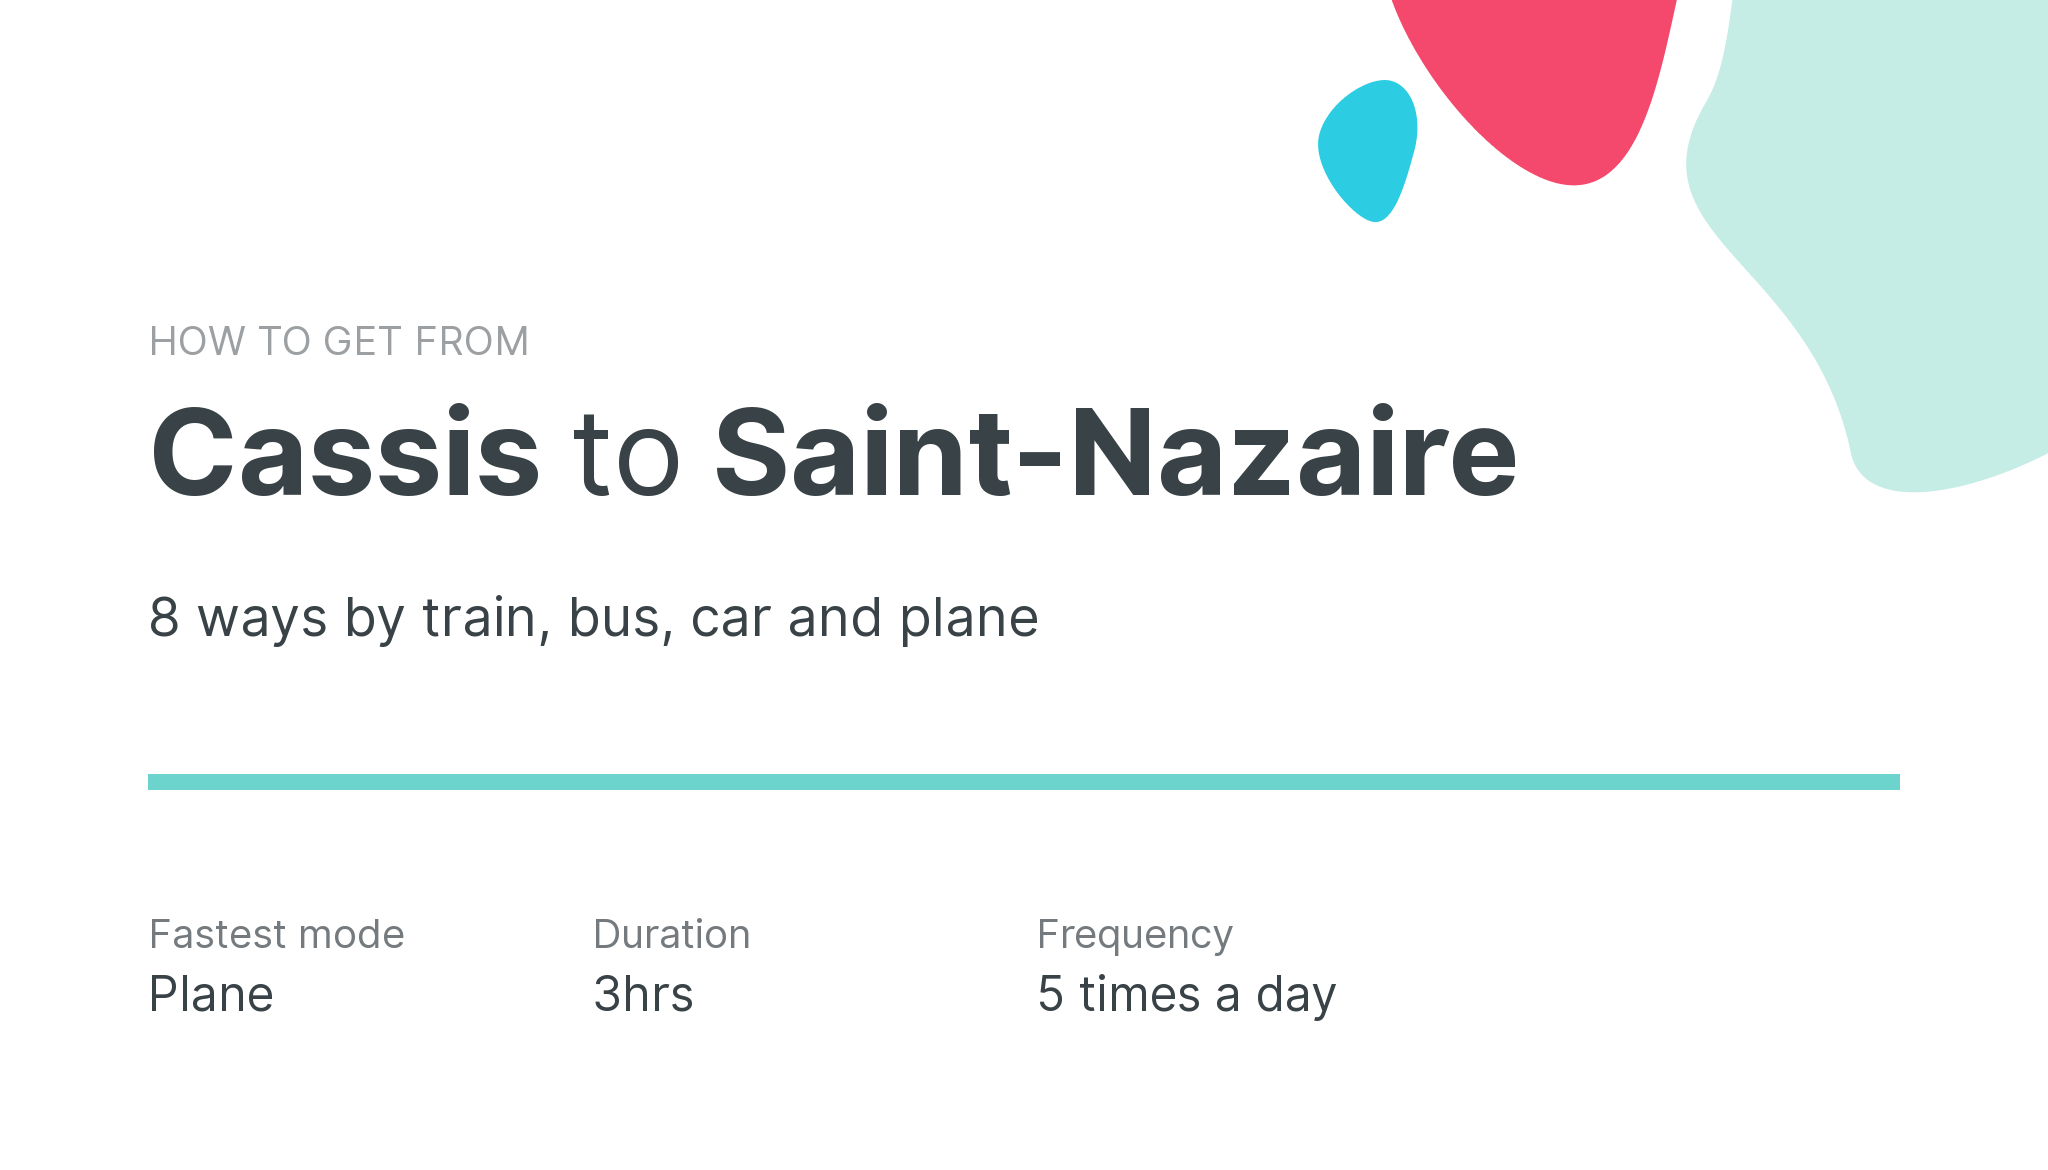 How do I get from Cassis to Saint-Nazaire